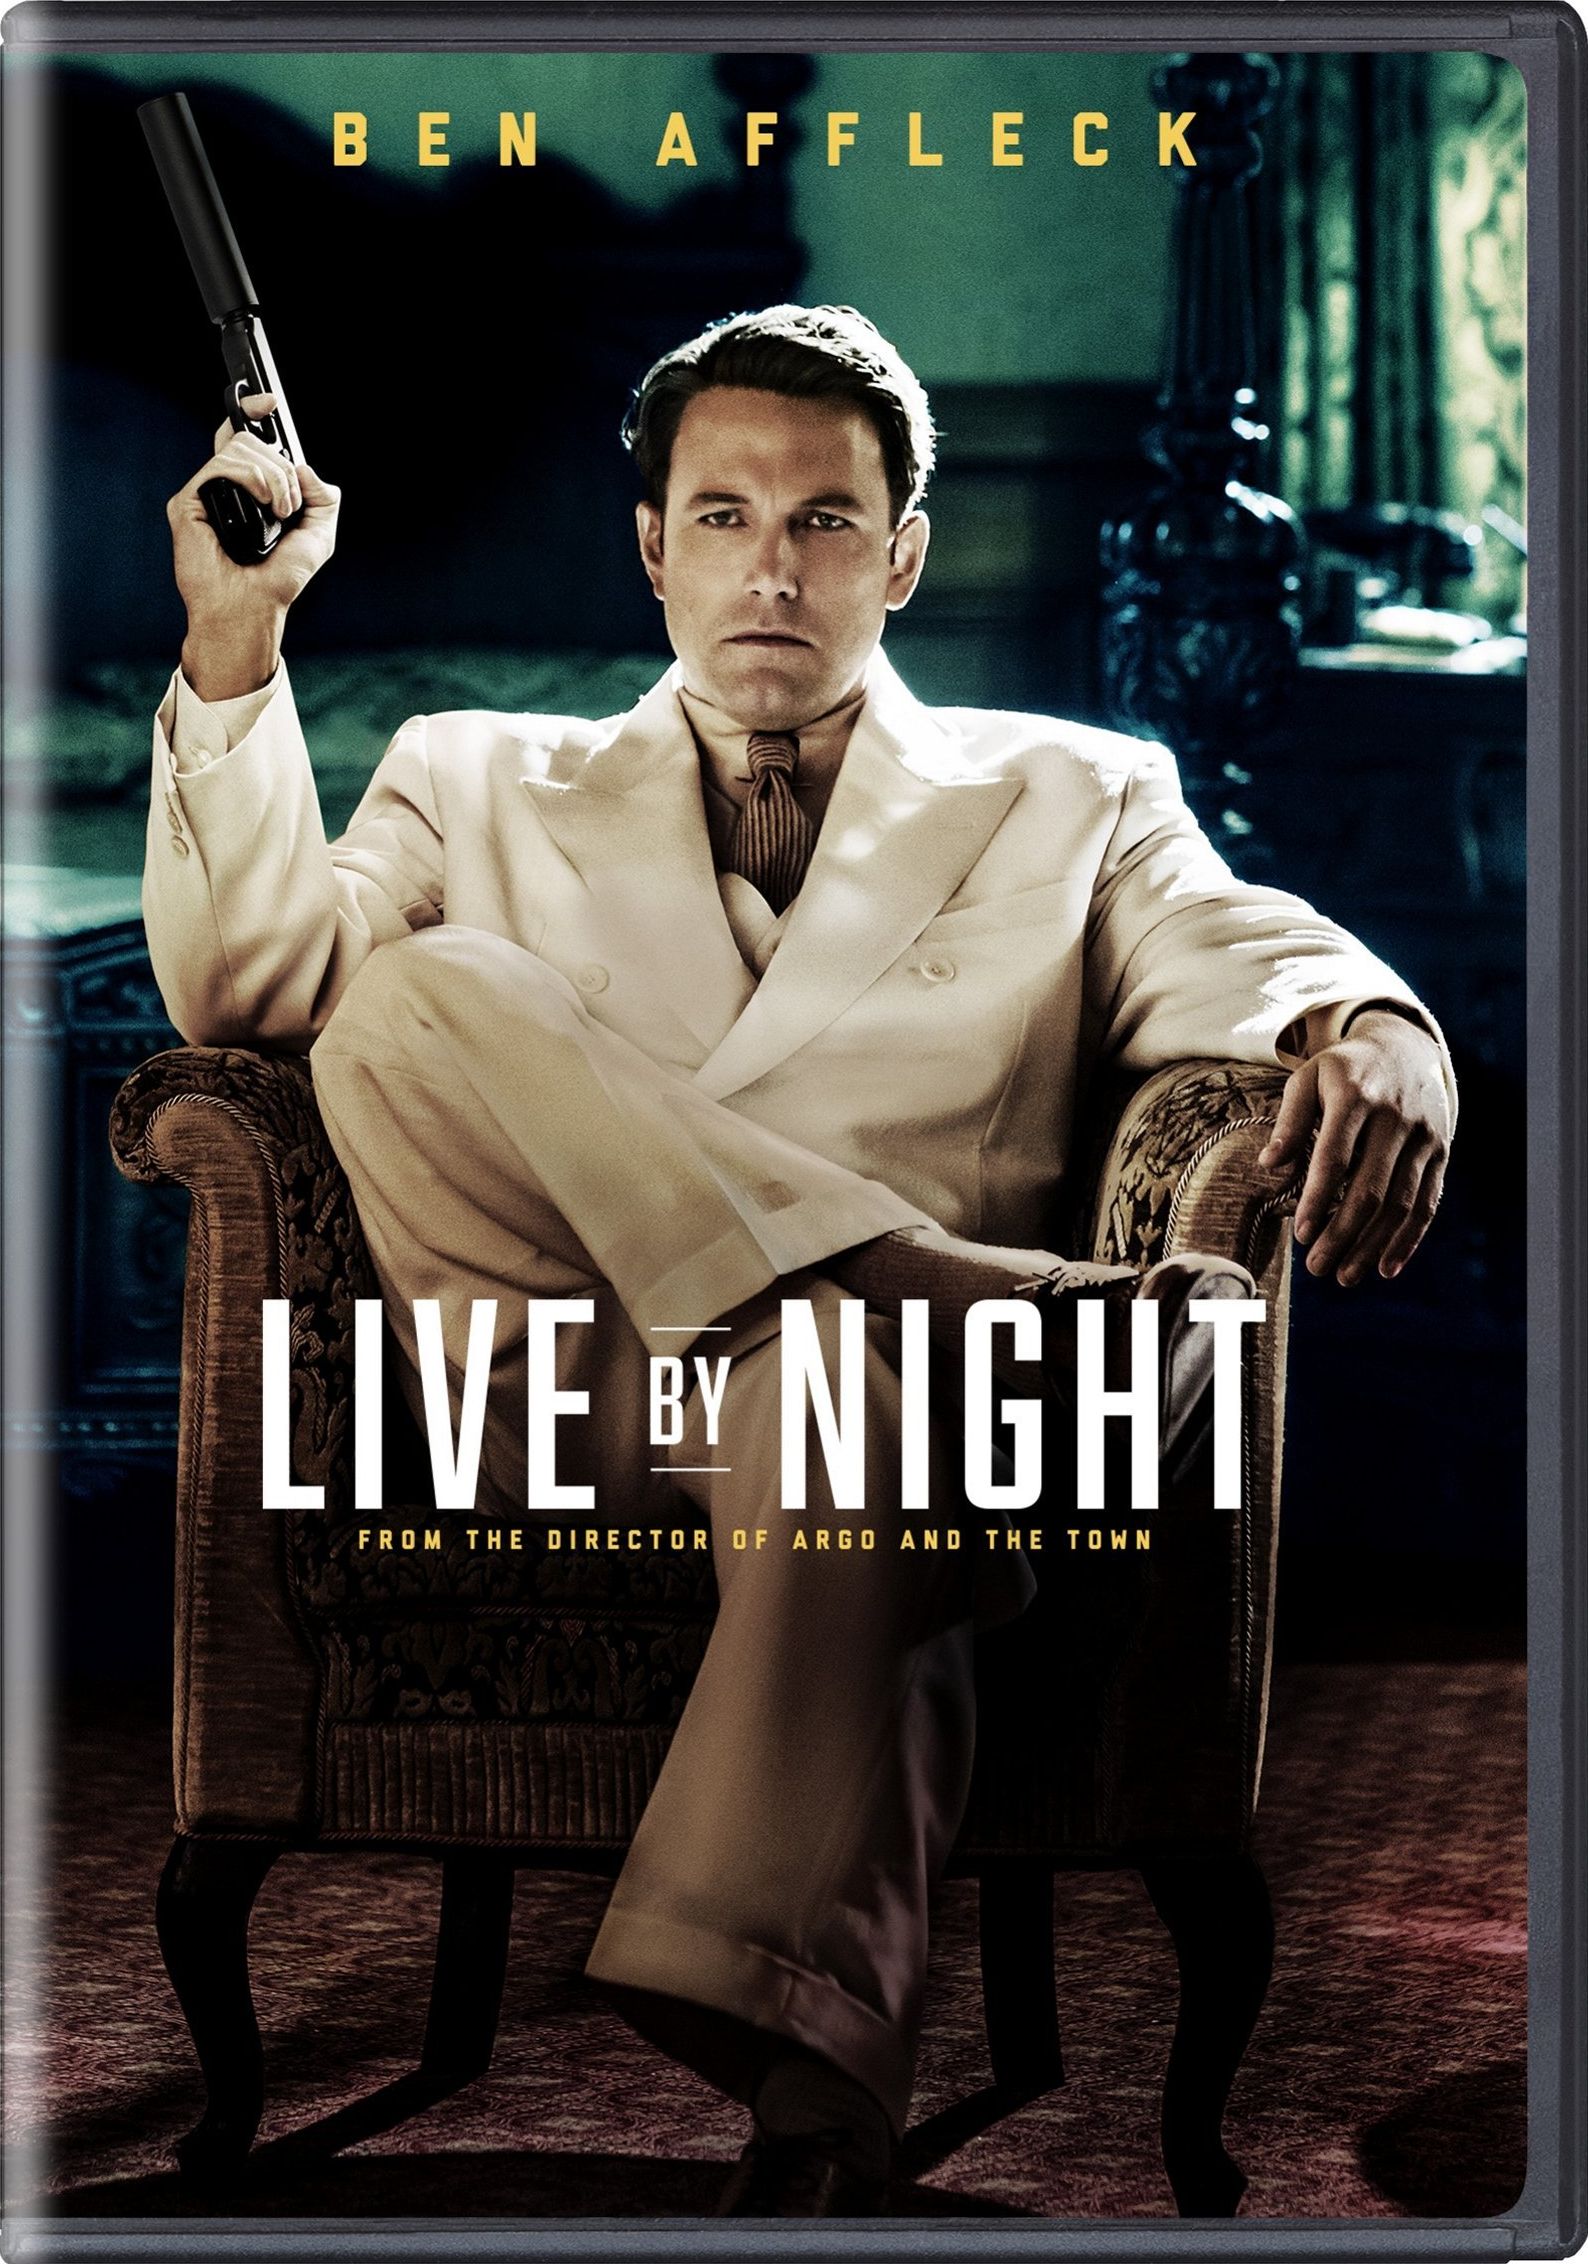 Live by Night DVD Release Date March 21, 2017